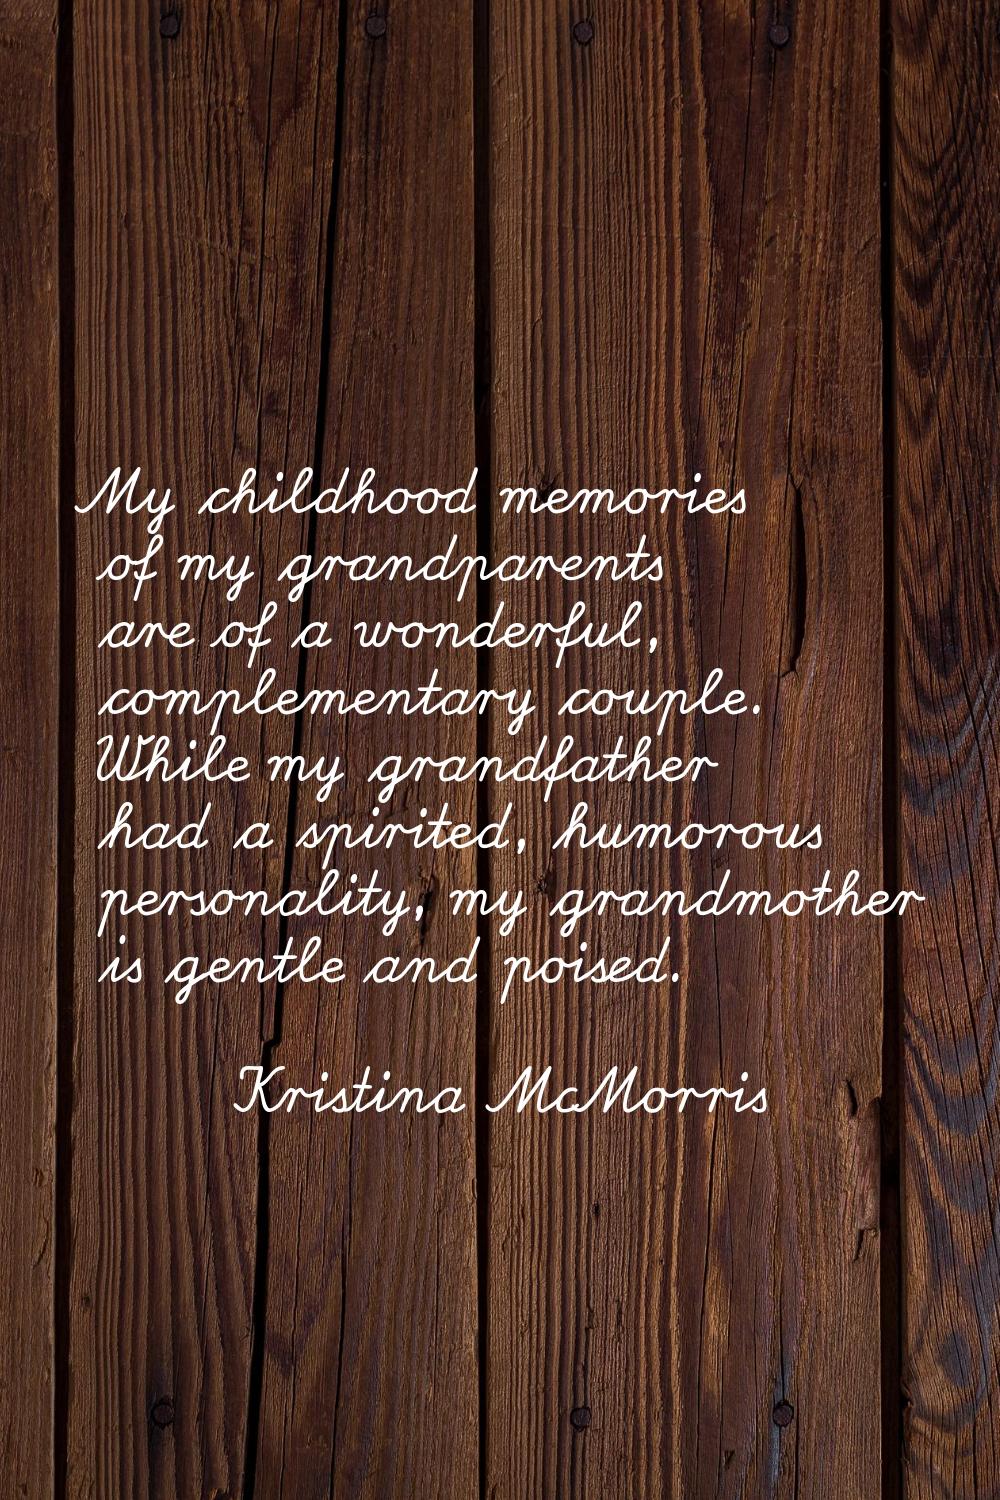 My childhood memories of my grandparents are of a wonderful, complementary couple. While my grandfa